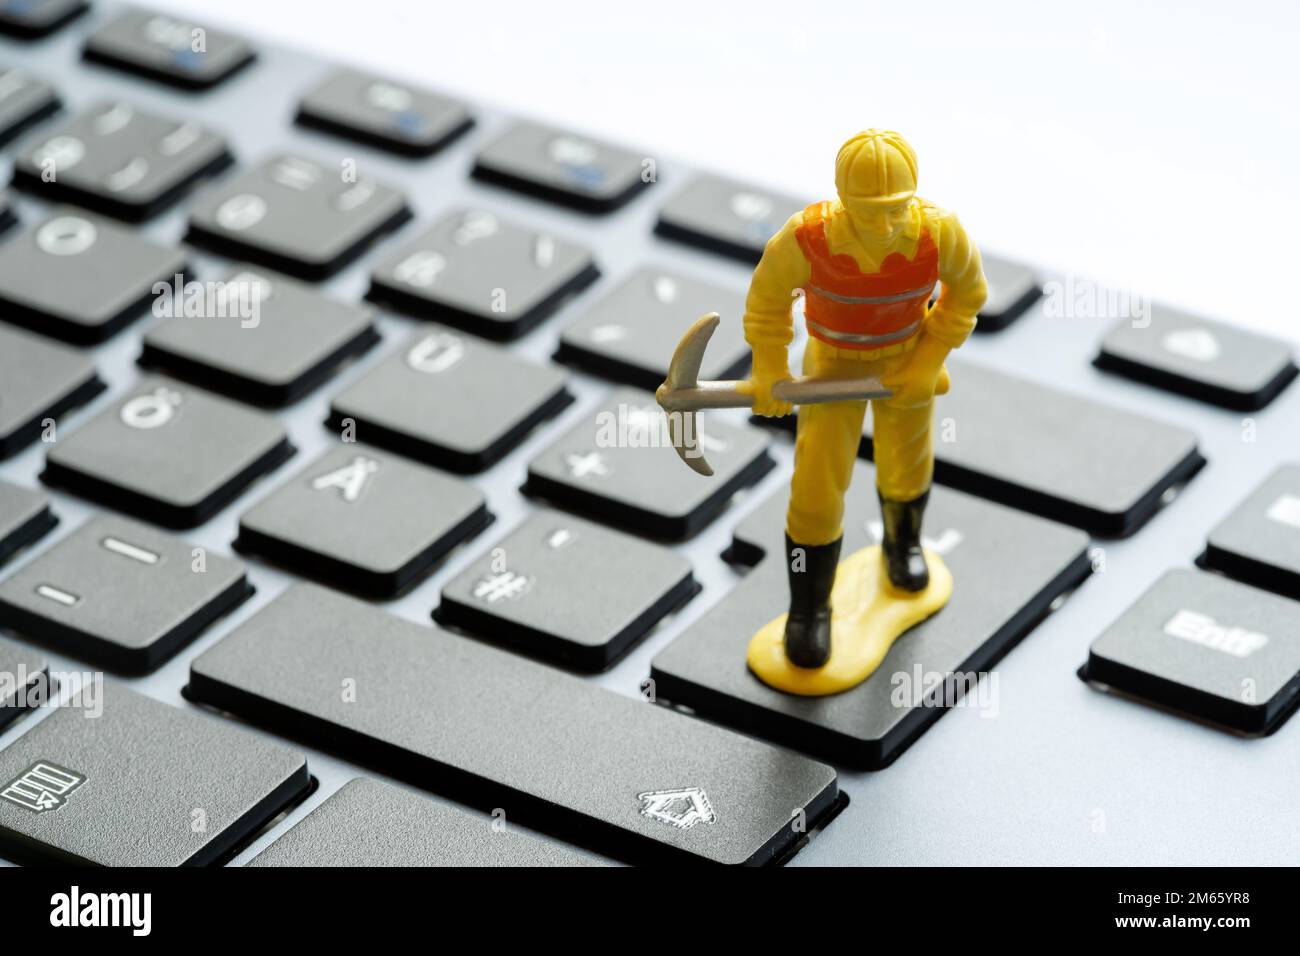 Construction worker figurine with a pickaxe standing on top of a simple desktop PC, computer keyboard. Data mining, crypto, cryptocurrency mining IT s Stock Photo